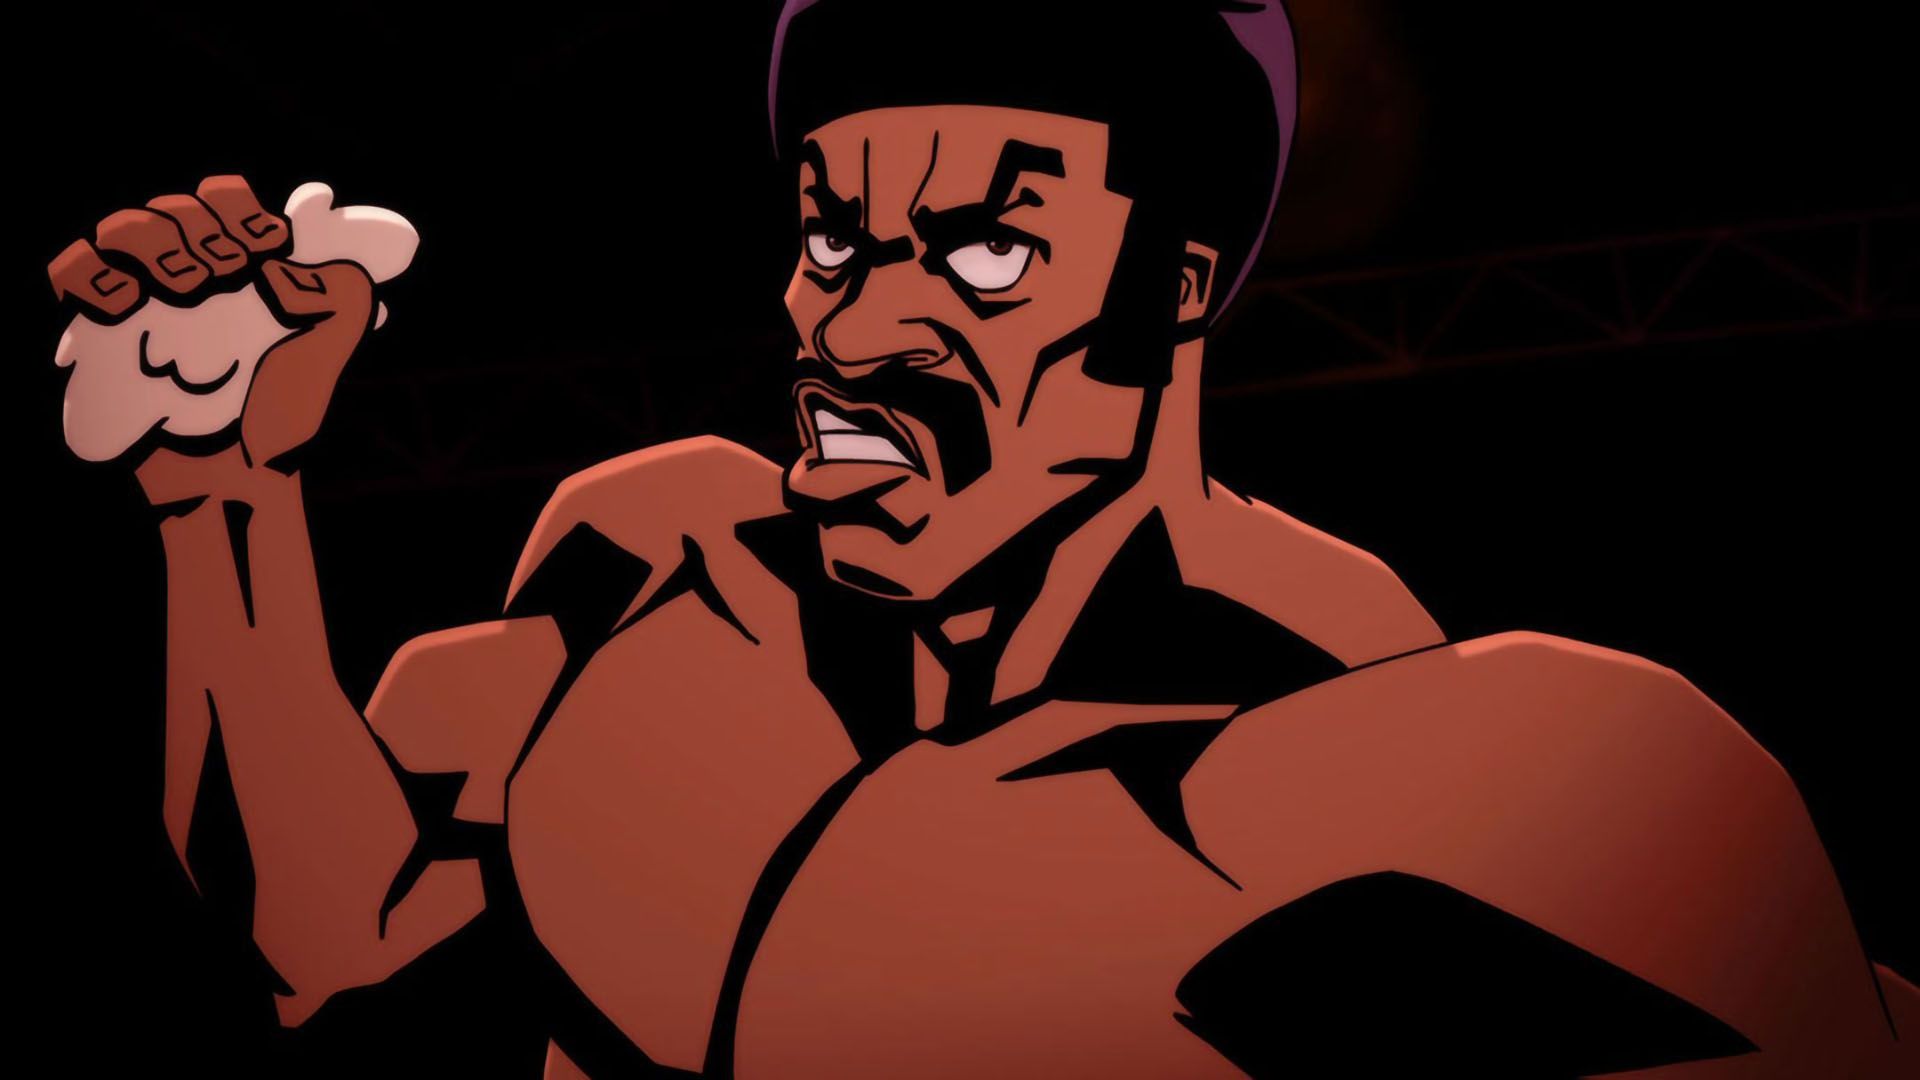 Black Dynamite Cartoon Nude - Watch Black Dynamite Episodes and Clips for Free from Adult Swim